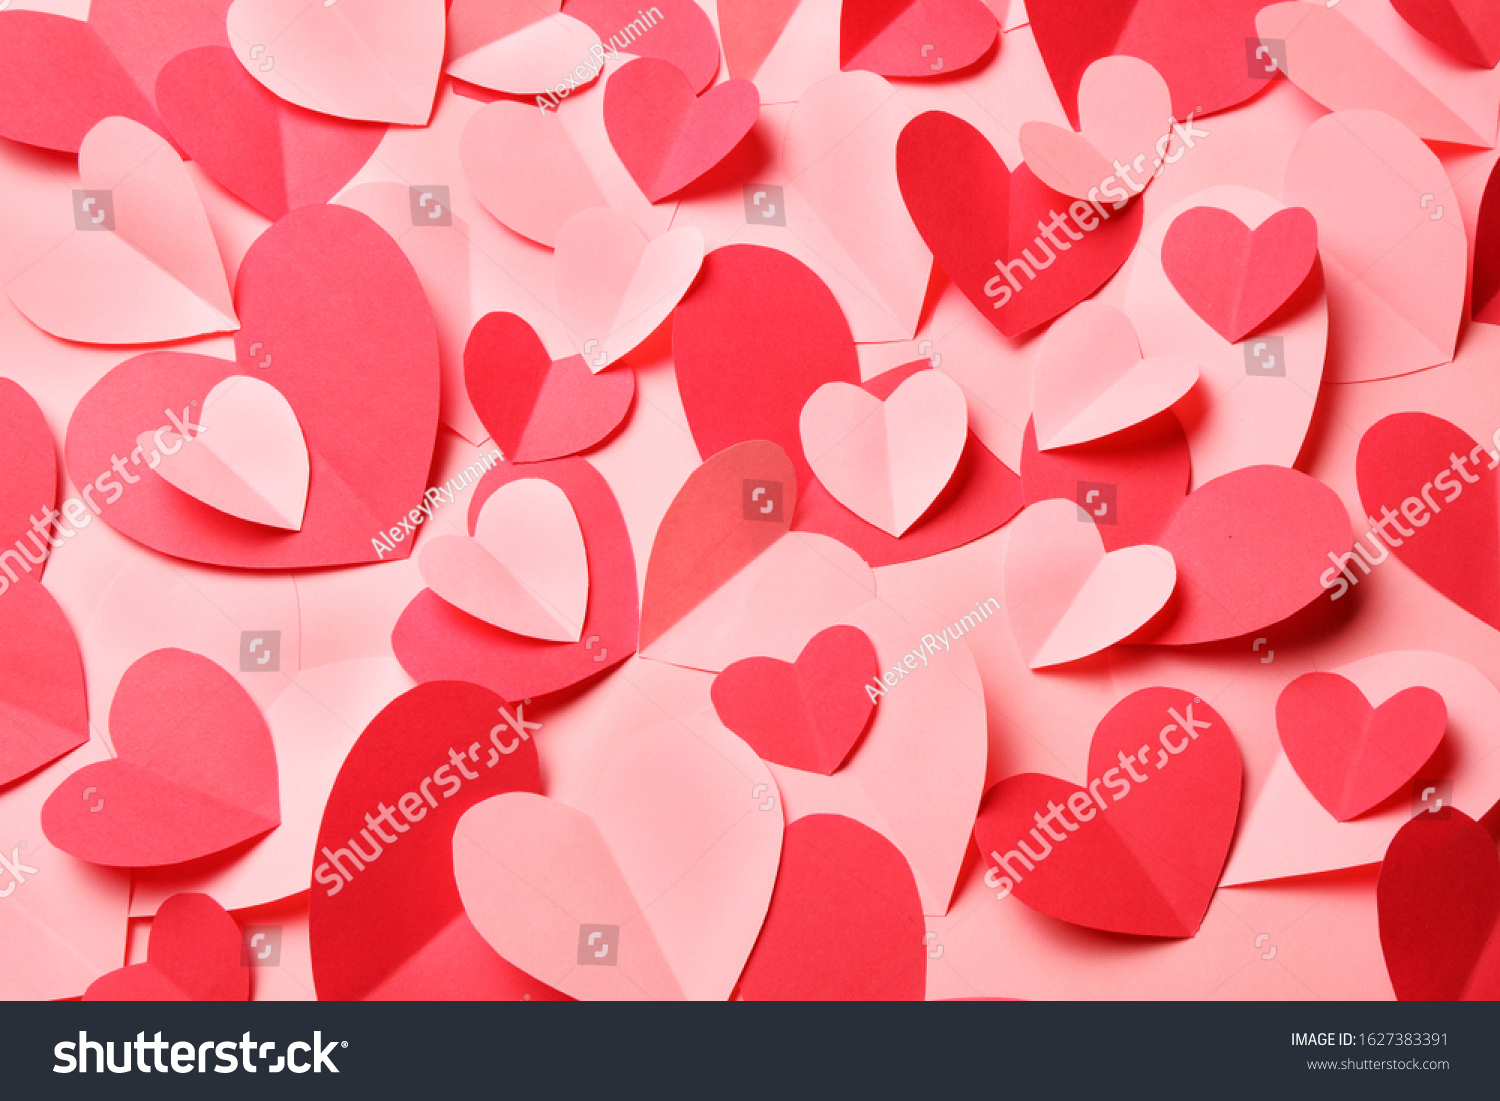 Bunch of cut out of pink and red paper hearts on pink background. Cute Valentines day, Womans day, love, romantic or wedding card, banner, invitation, sale, offer, ad background for banner, congratulation, card, offer, flyer, advertising, invitation.